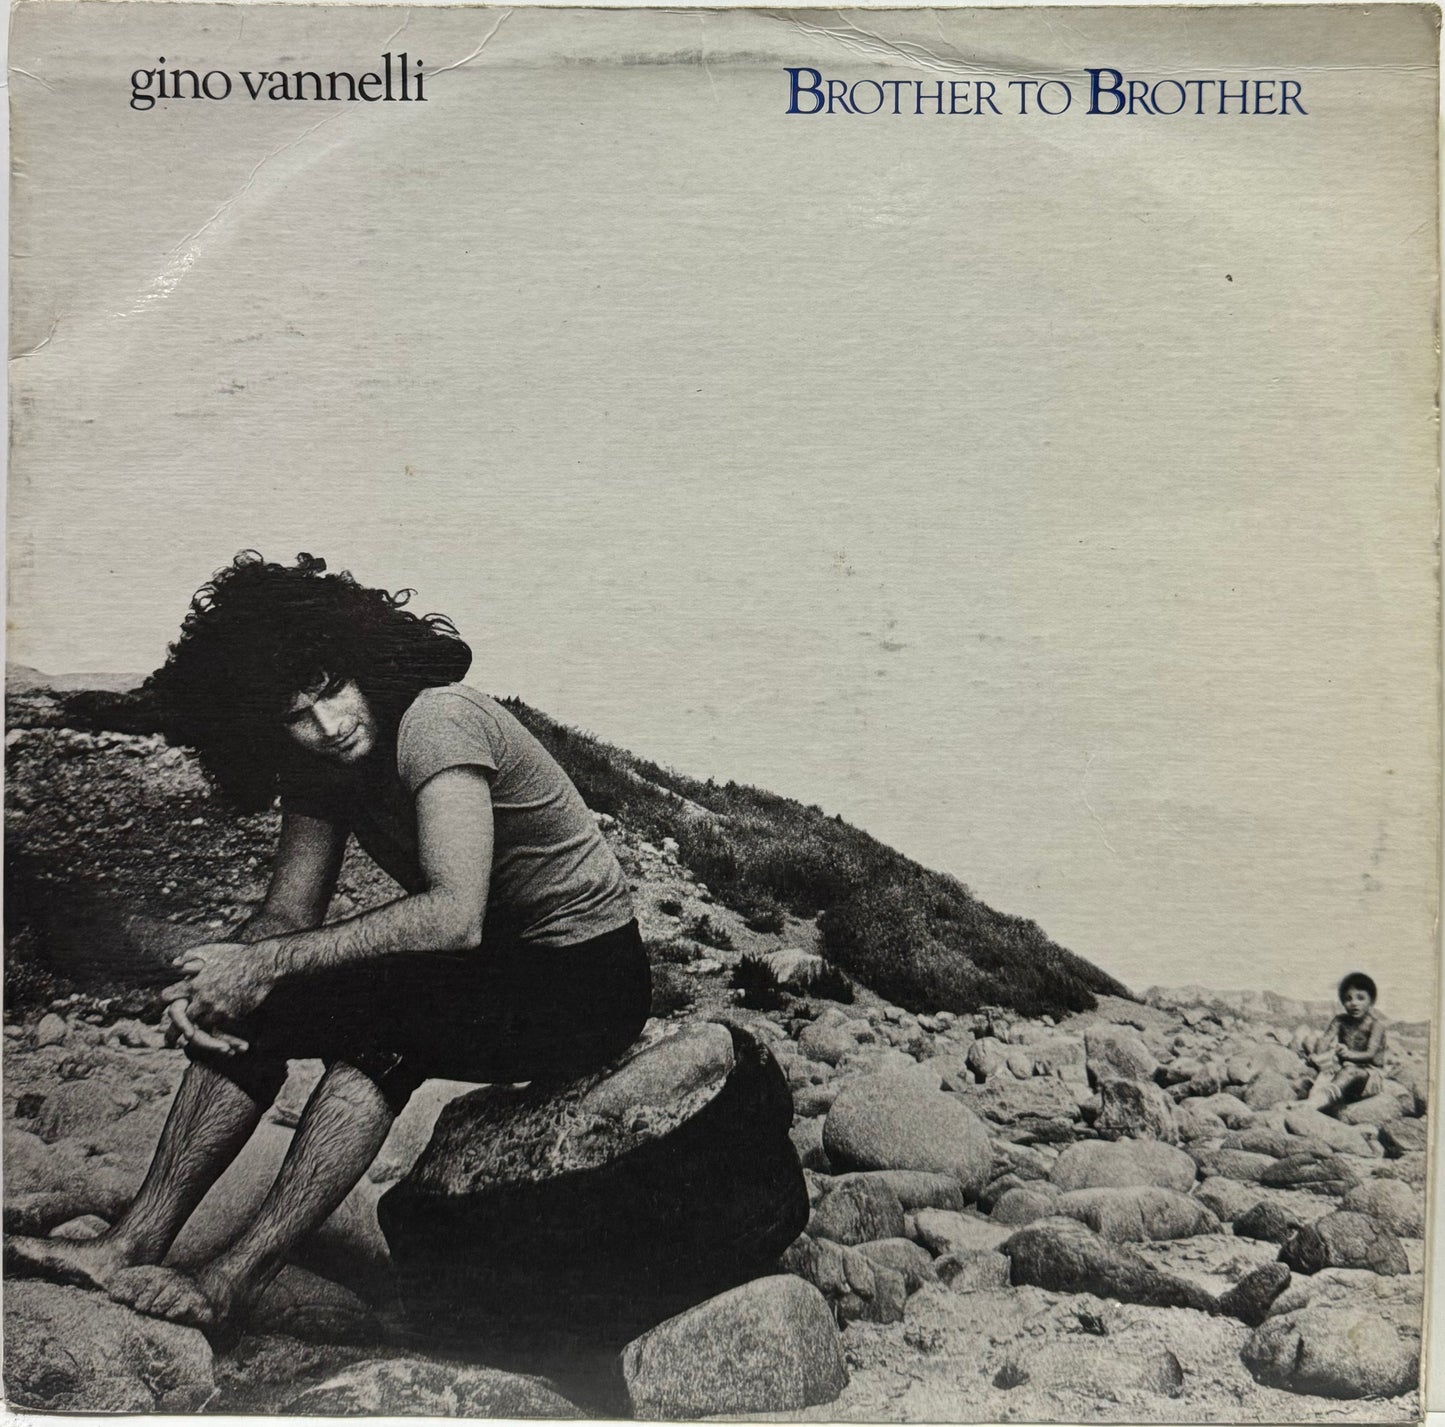 GINO VANNELLI - BROTHER TO BROTHER  LP